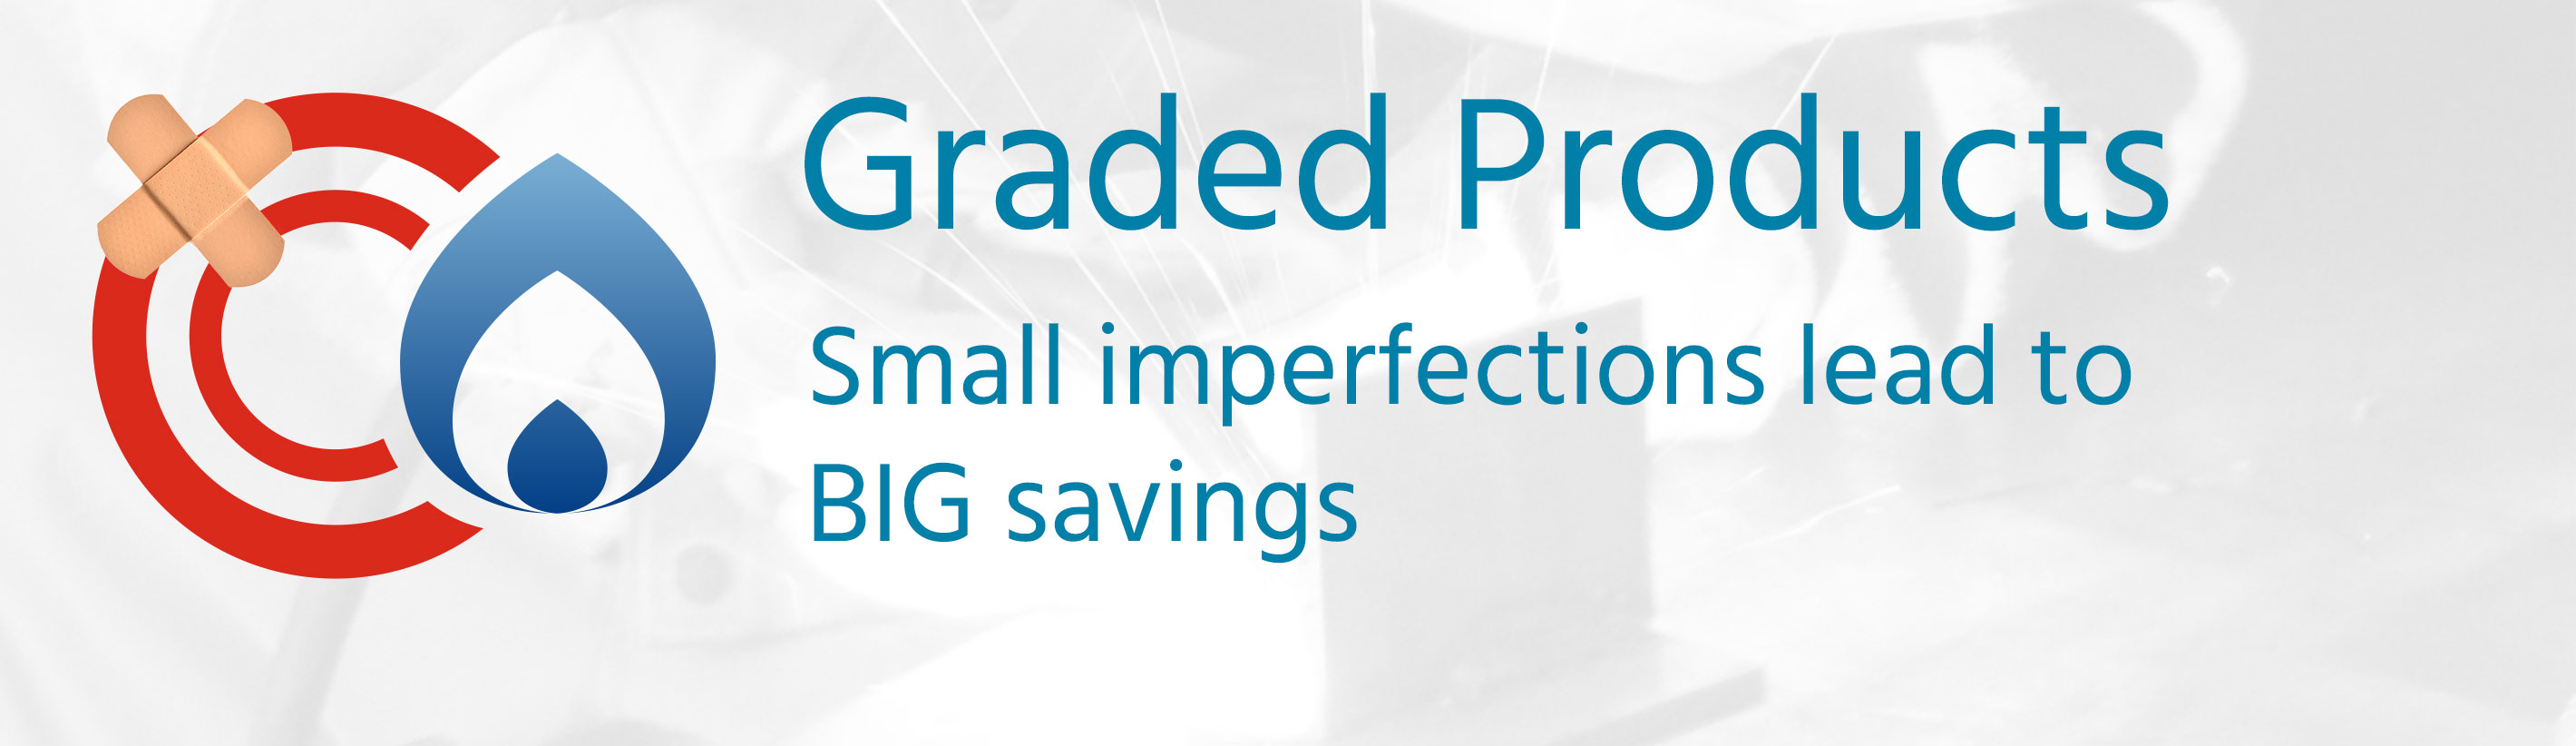 Graded Products, Small imperfections lead to BIG savings